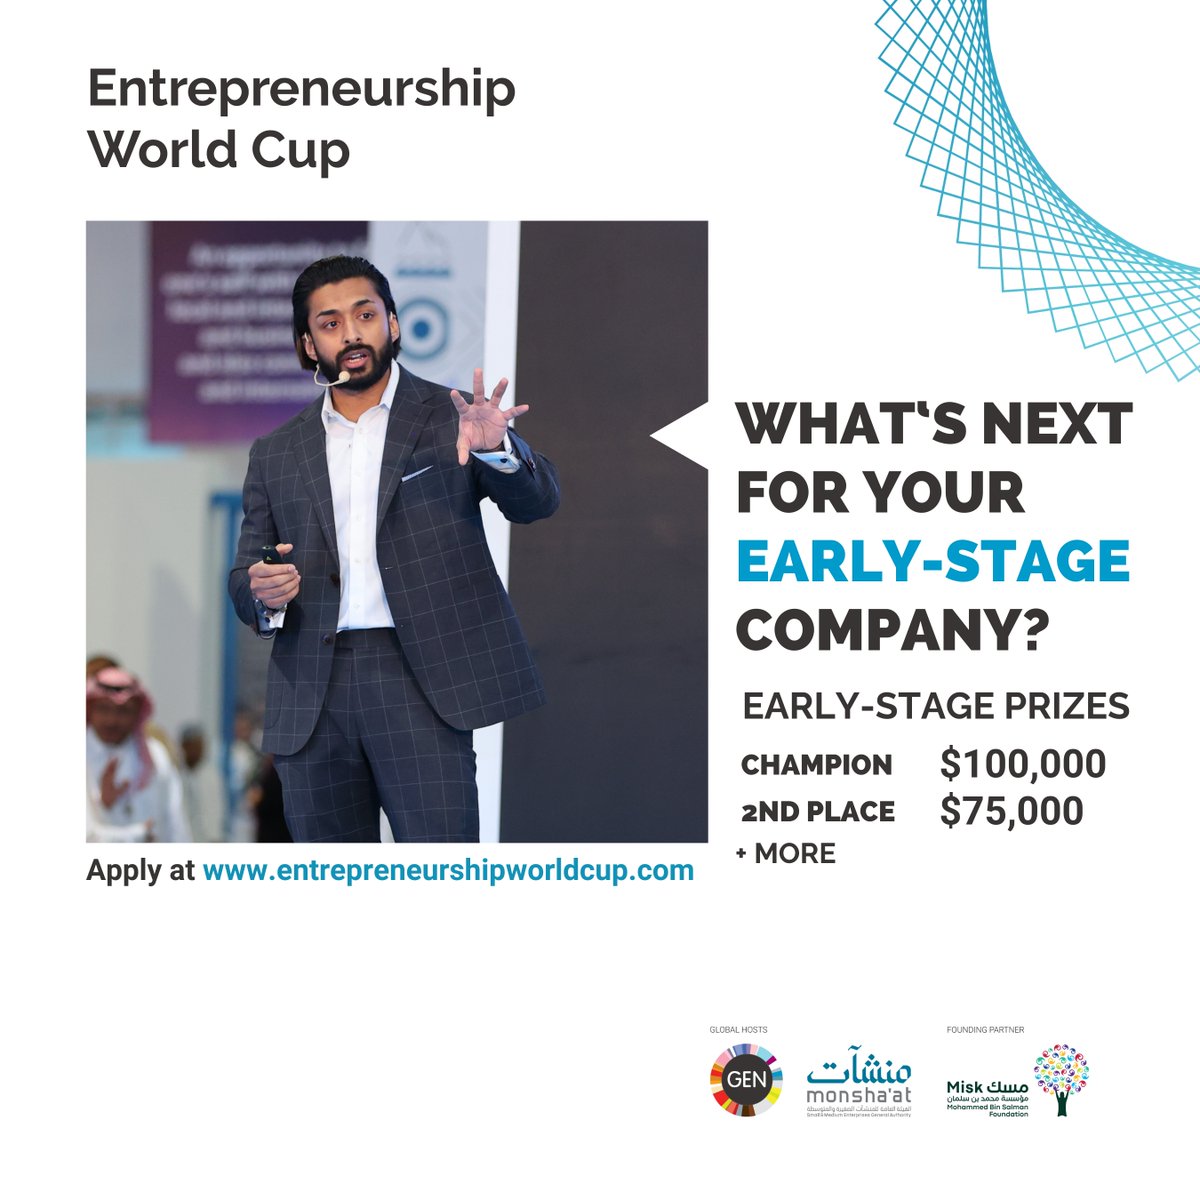 There are 5 cash prizes for the top companies in the #EntrepreneurshipWorldCup early-stage category! Apply today: genglobal.org/ewc/apply #EWC2024